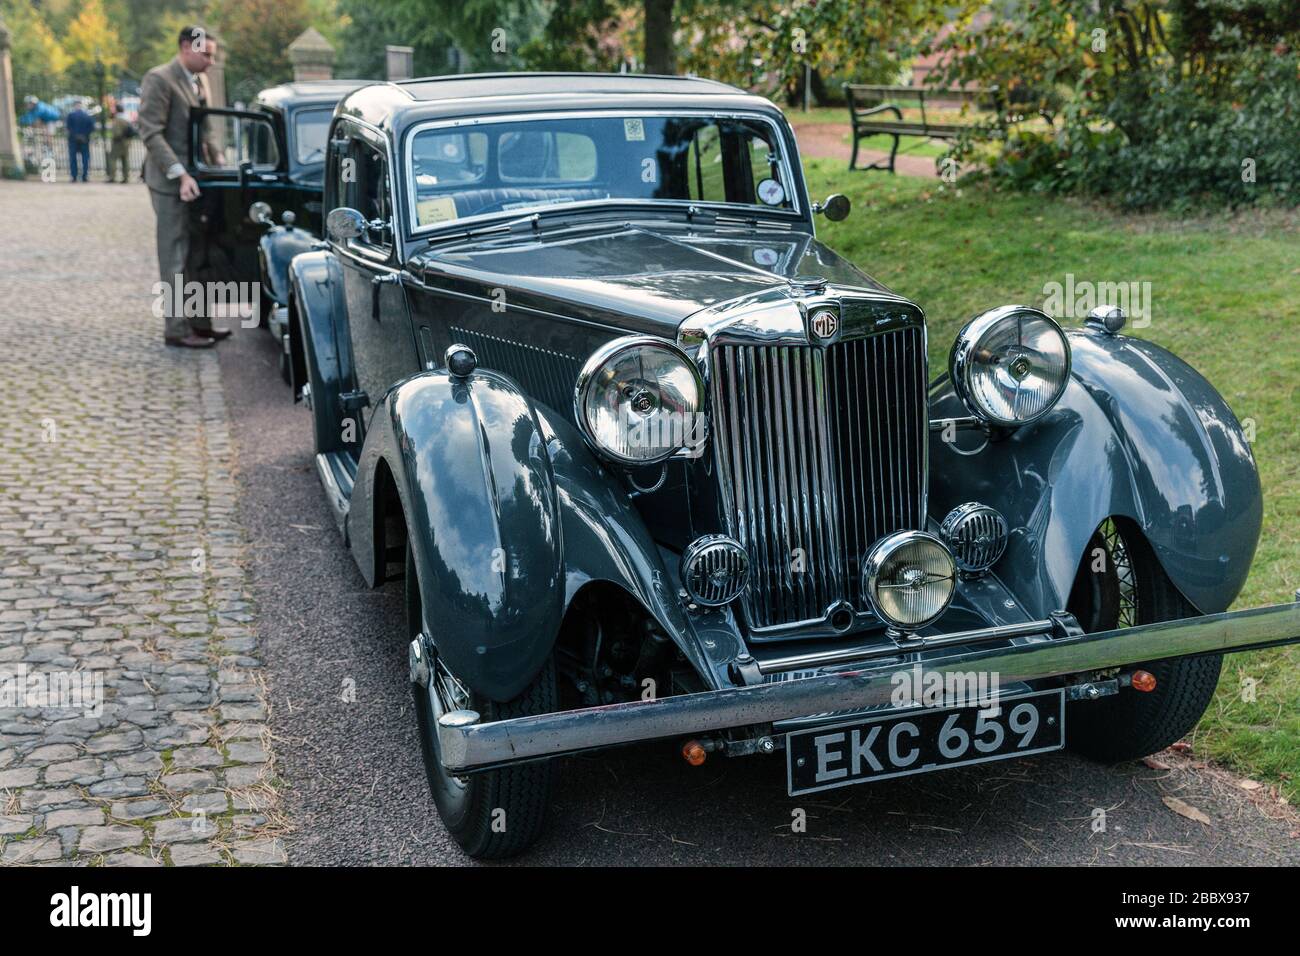 2 vintage motor cars headed by a 1938 MG SA Saloon EKC 659, Papplewick Pumping Station 1940's event, England Stock Photo